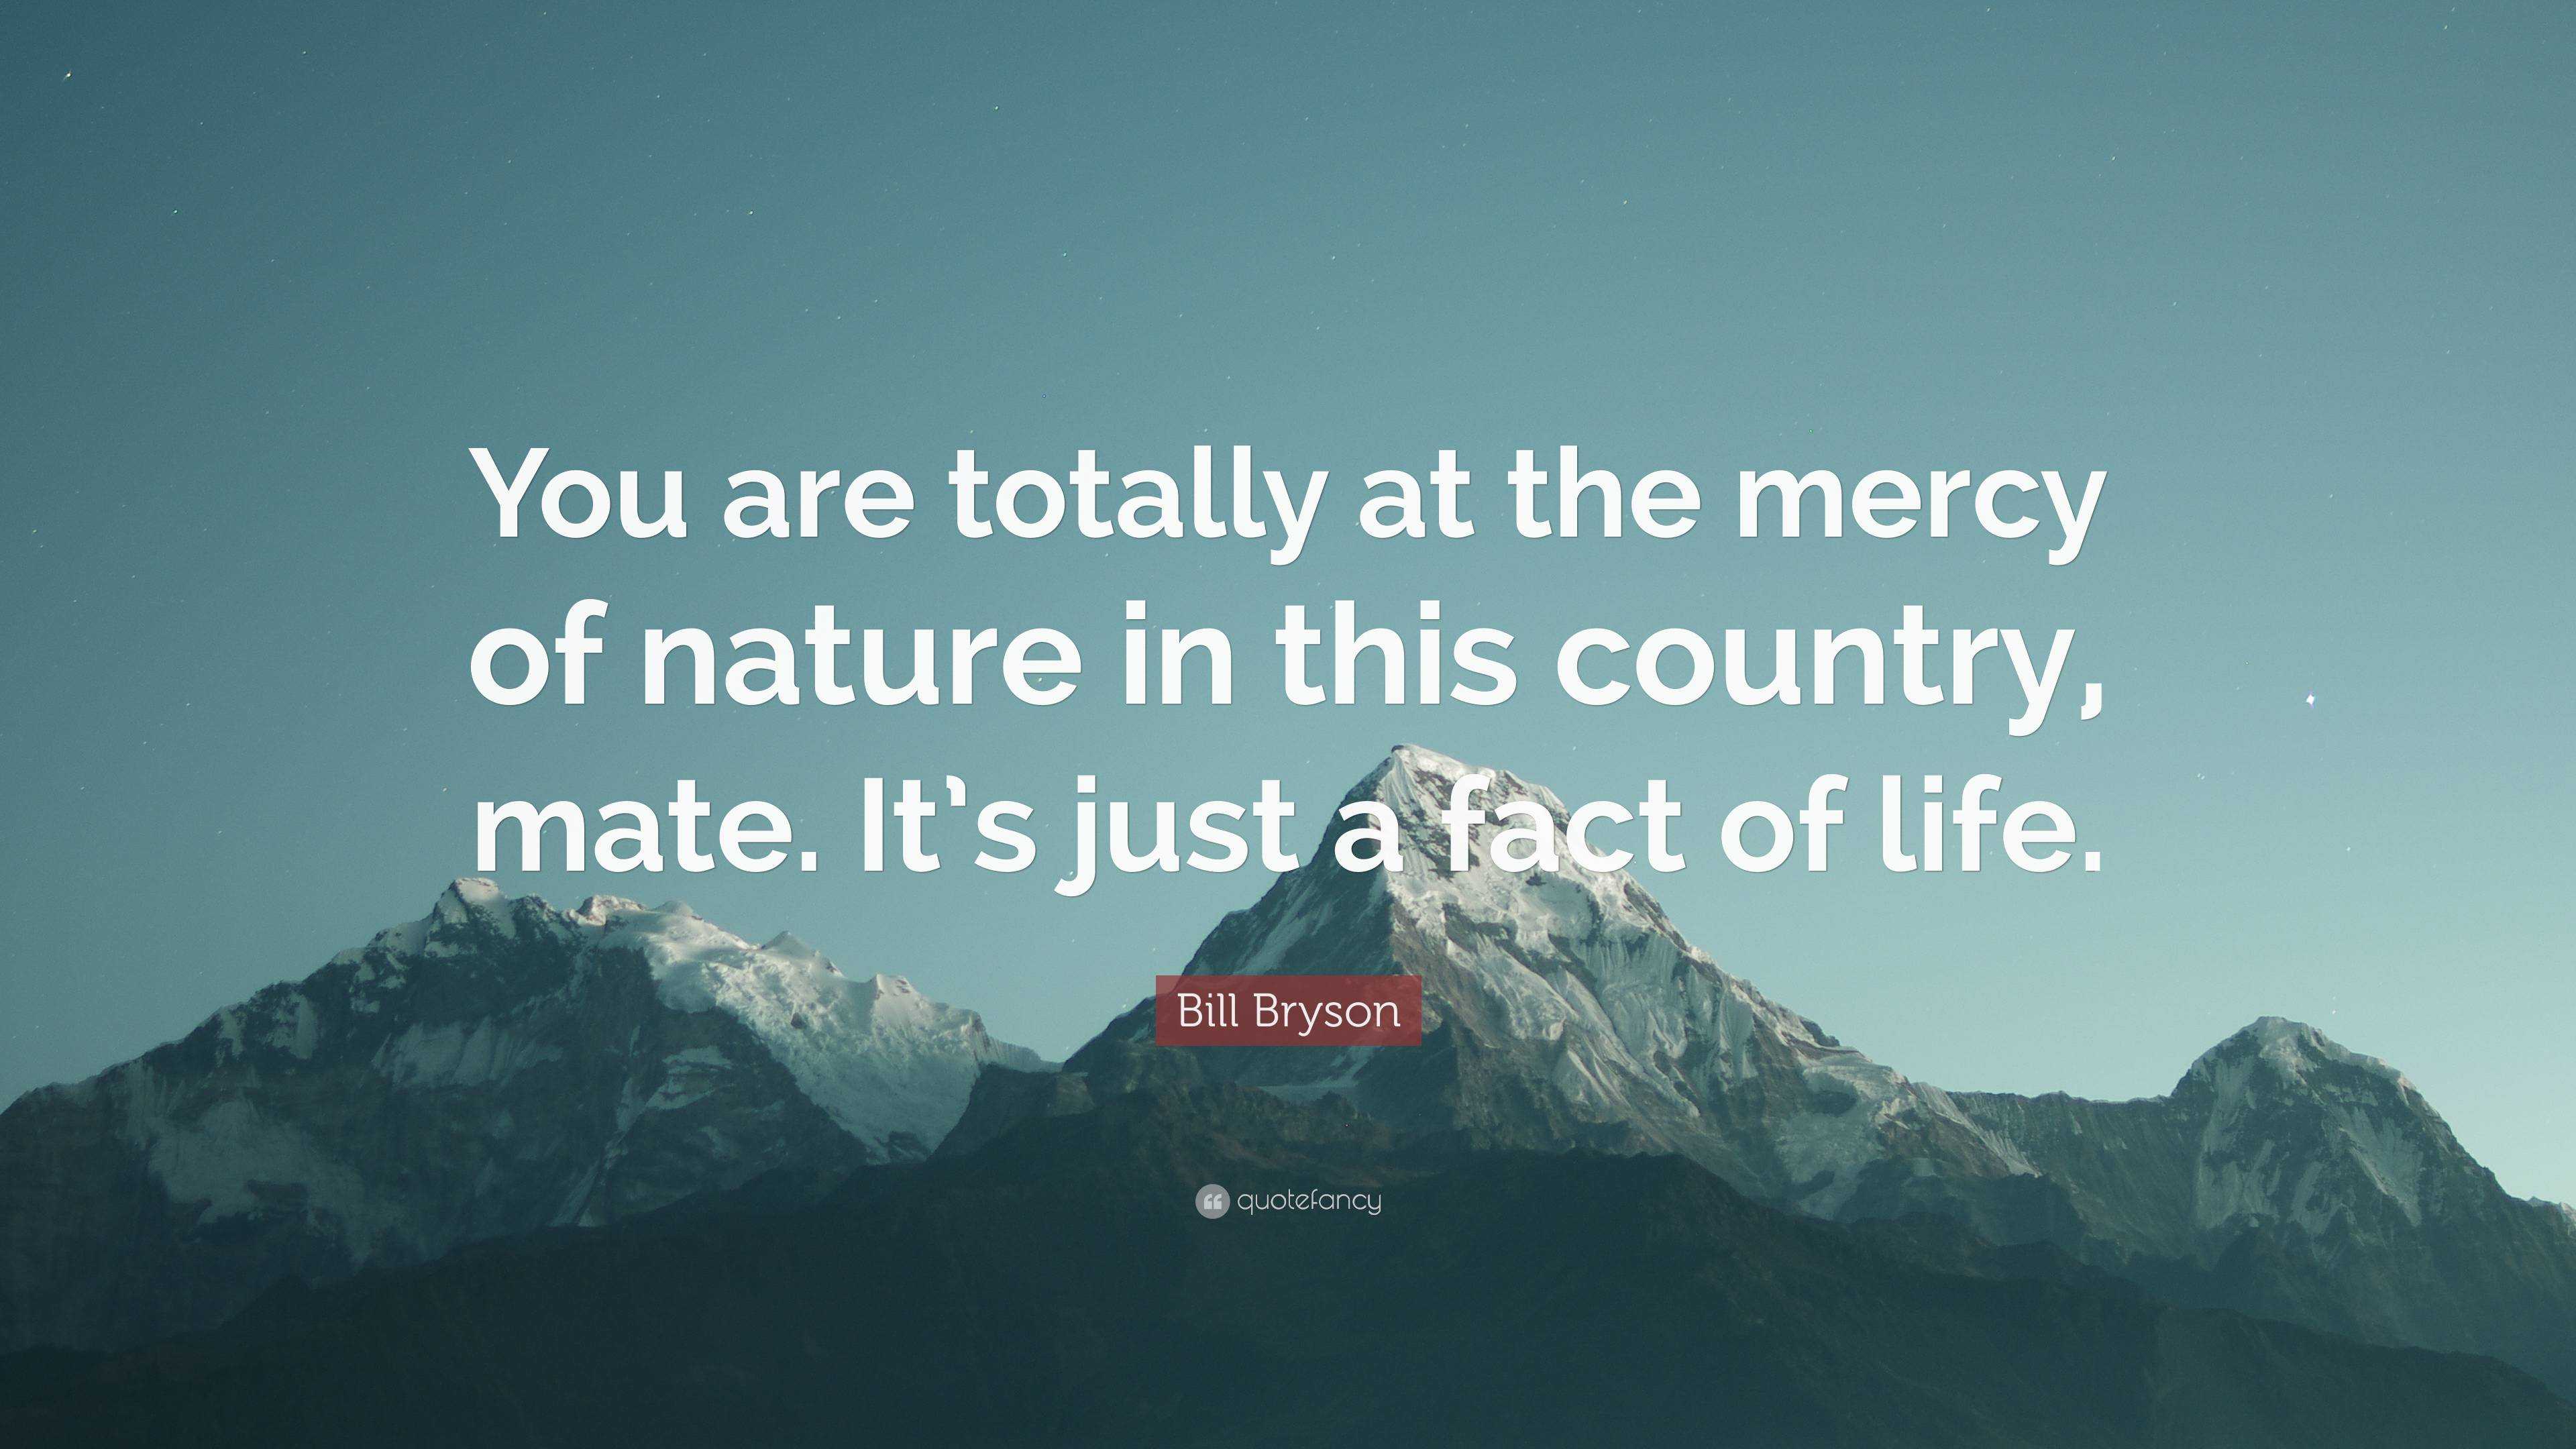 Bill Bryson Quote: “You are totally at the mercy of nature in country, mate. It's